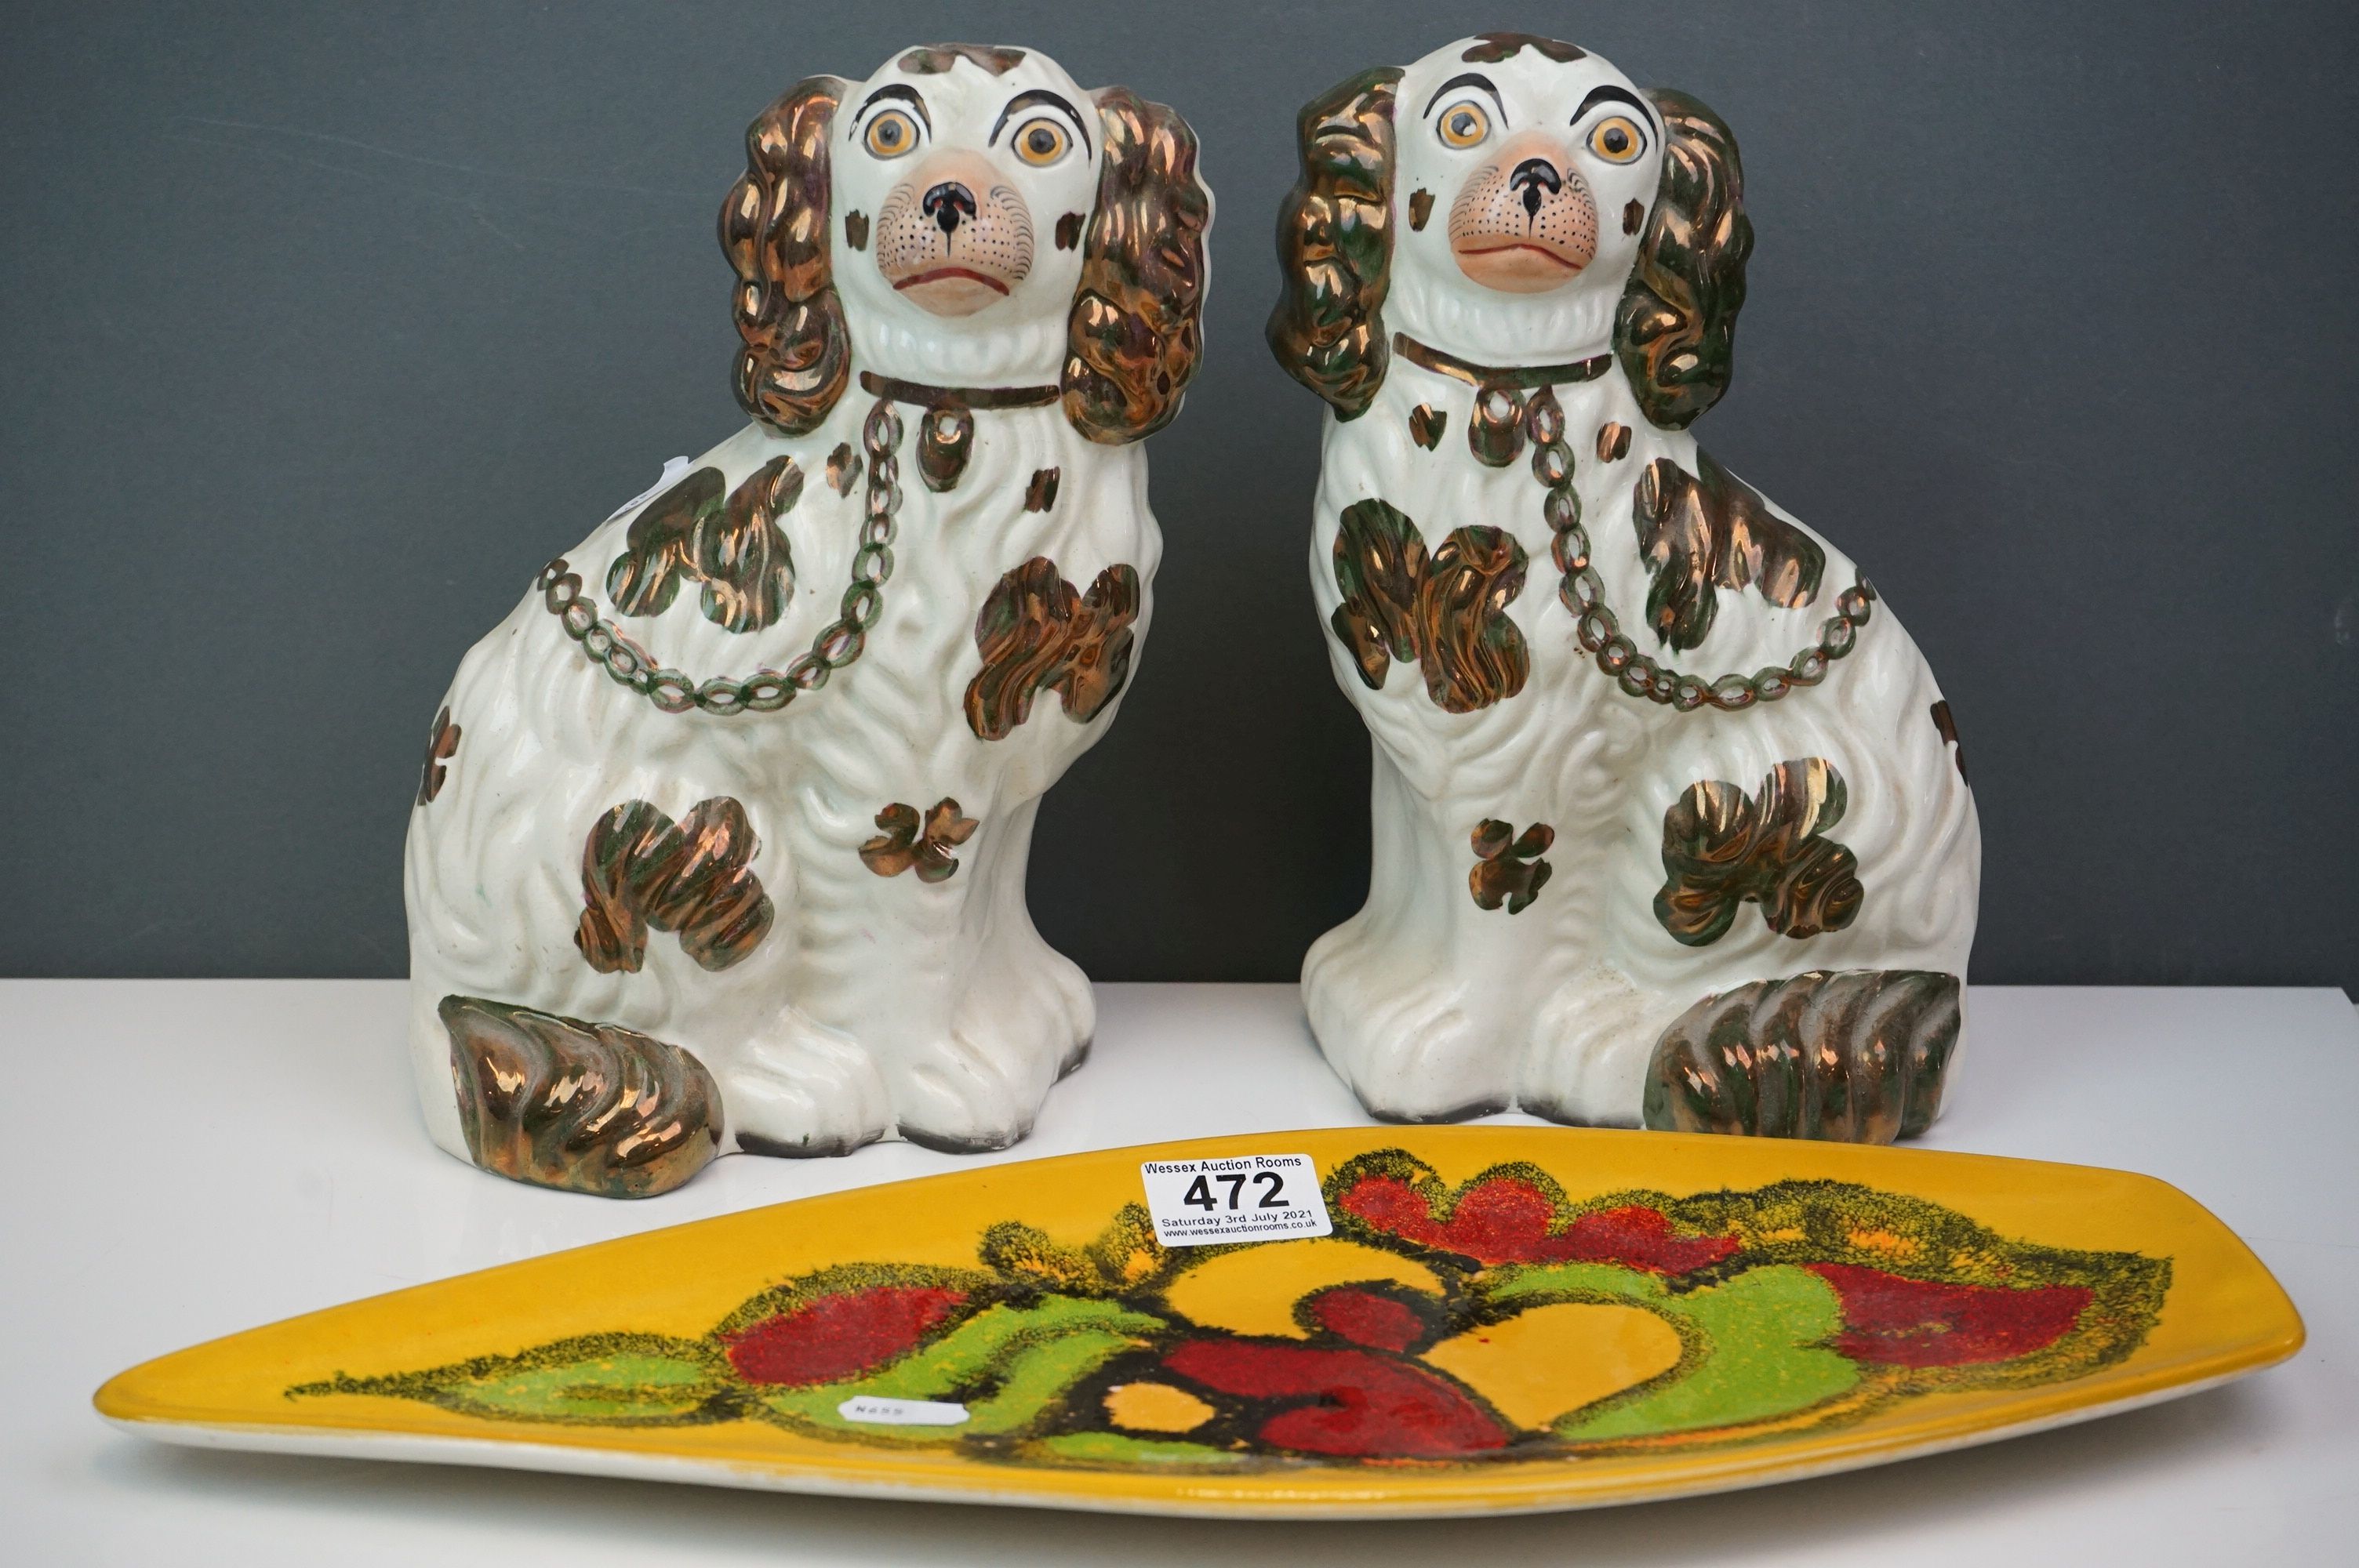 A 1970s Poole Pottery Delphis pattern dish together with a pair of lustre Staffordshire dogs.